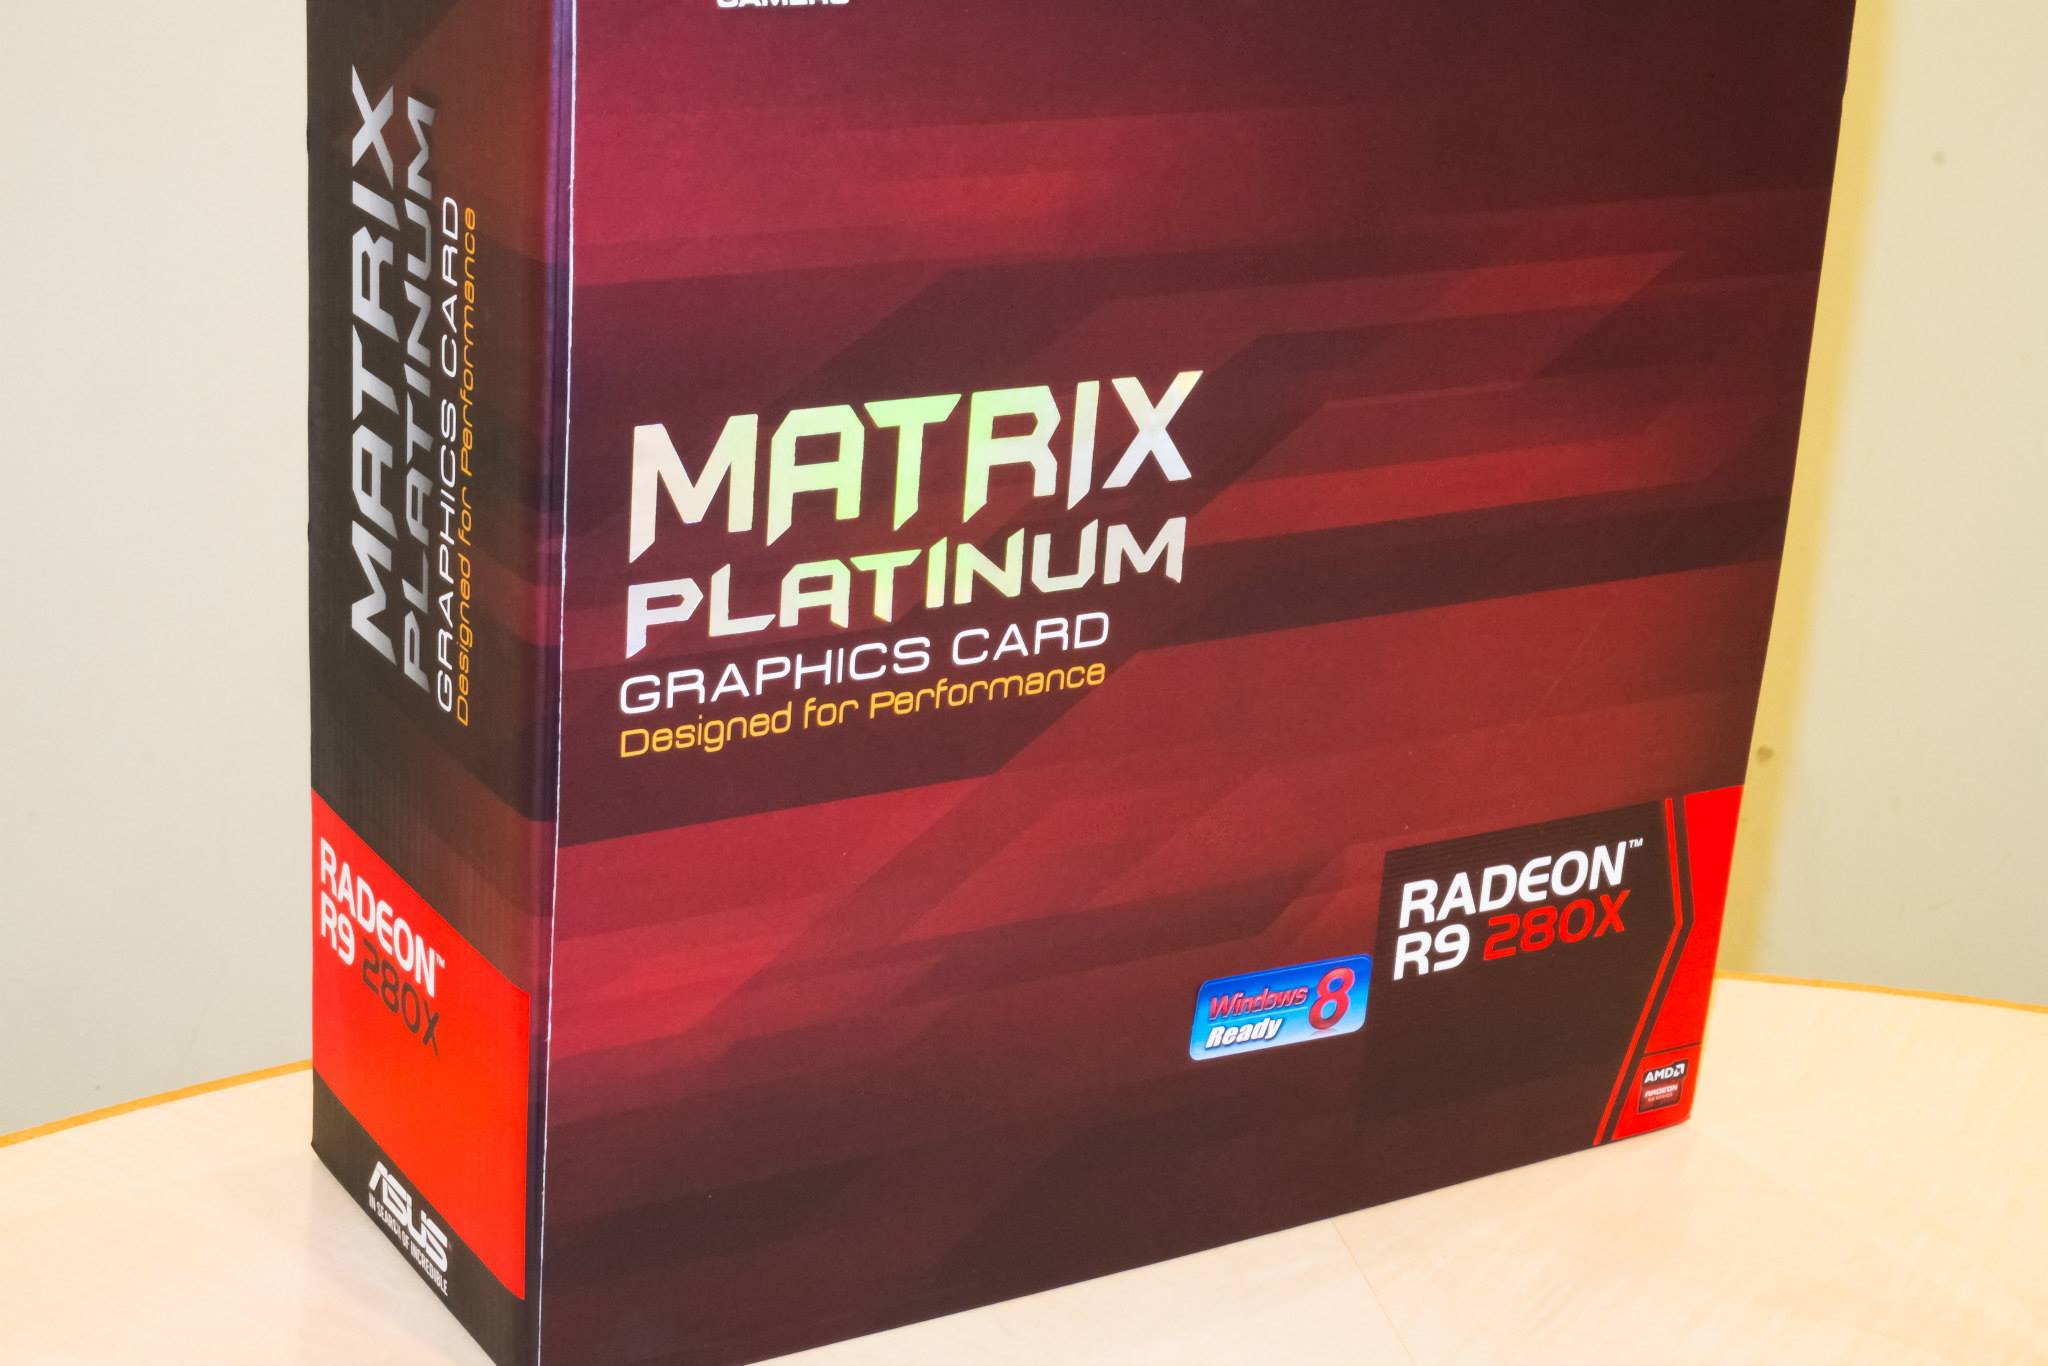 Media asset (photo, screenshot, or image in full size) related to contents posted at 3dfxzone.it | Image Name: news20183-ASUS-ROG-Matrix-R9-280X-Platinum_9.jpg